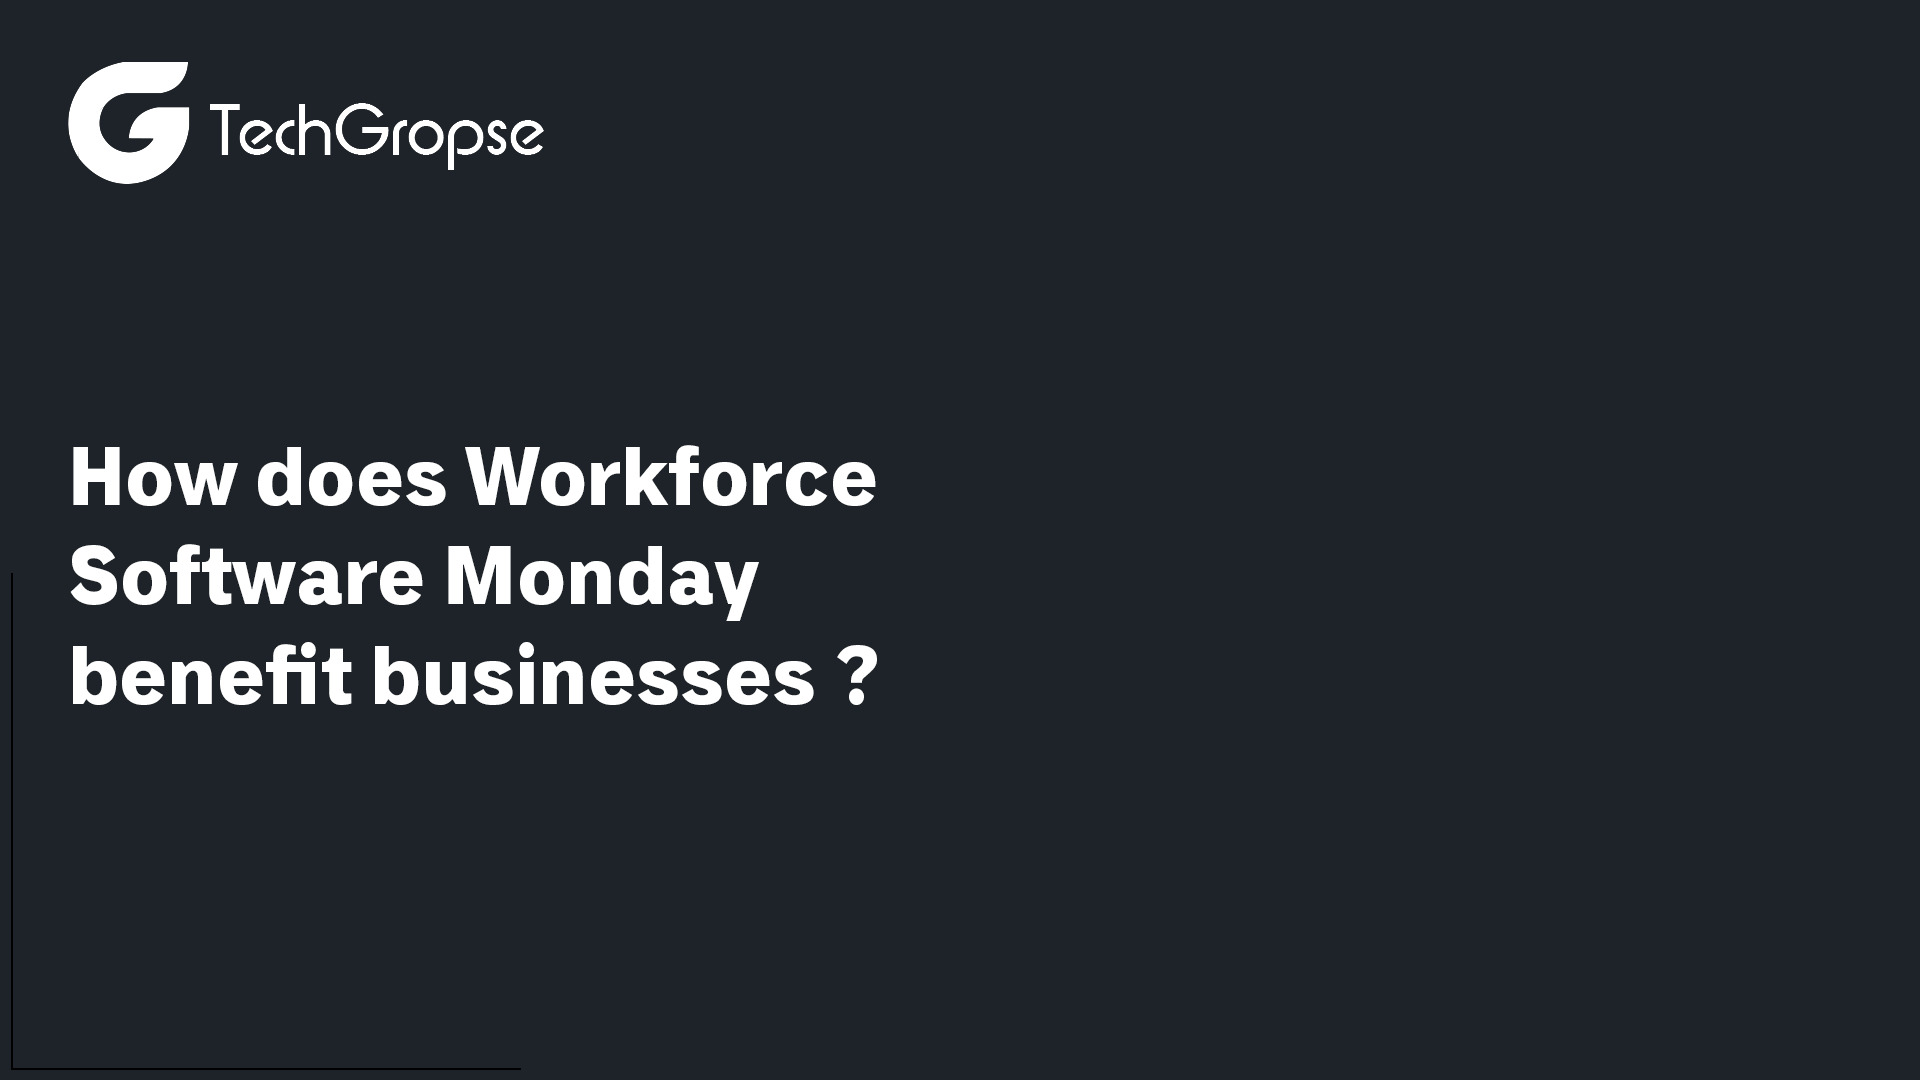 How Does Workforce Software Monday Benefit Businesses?